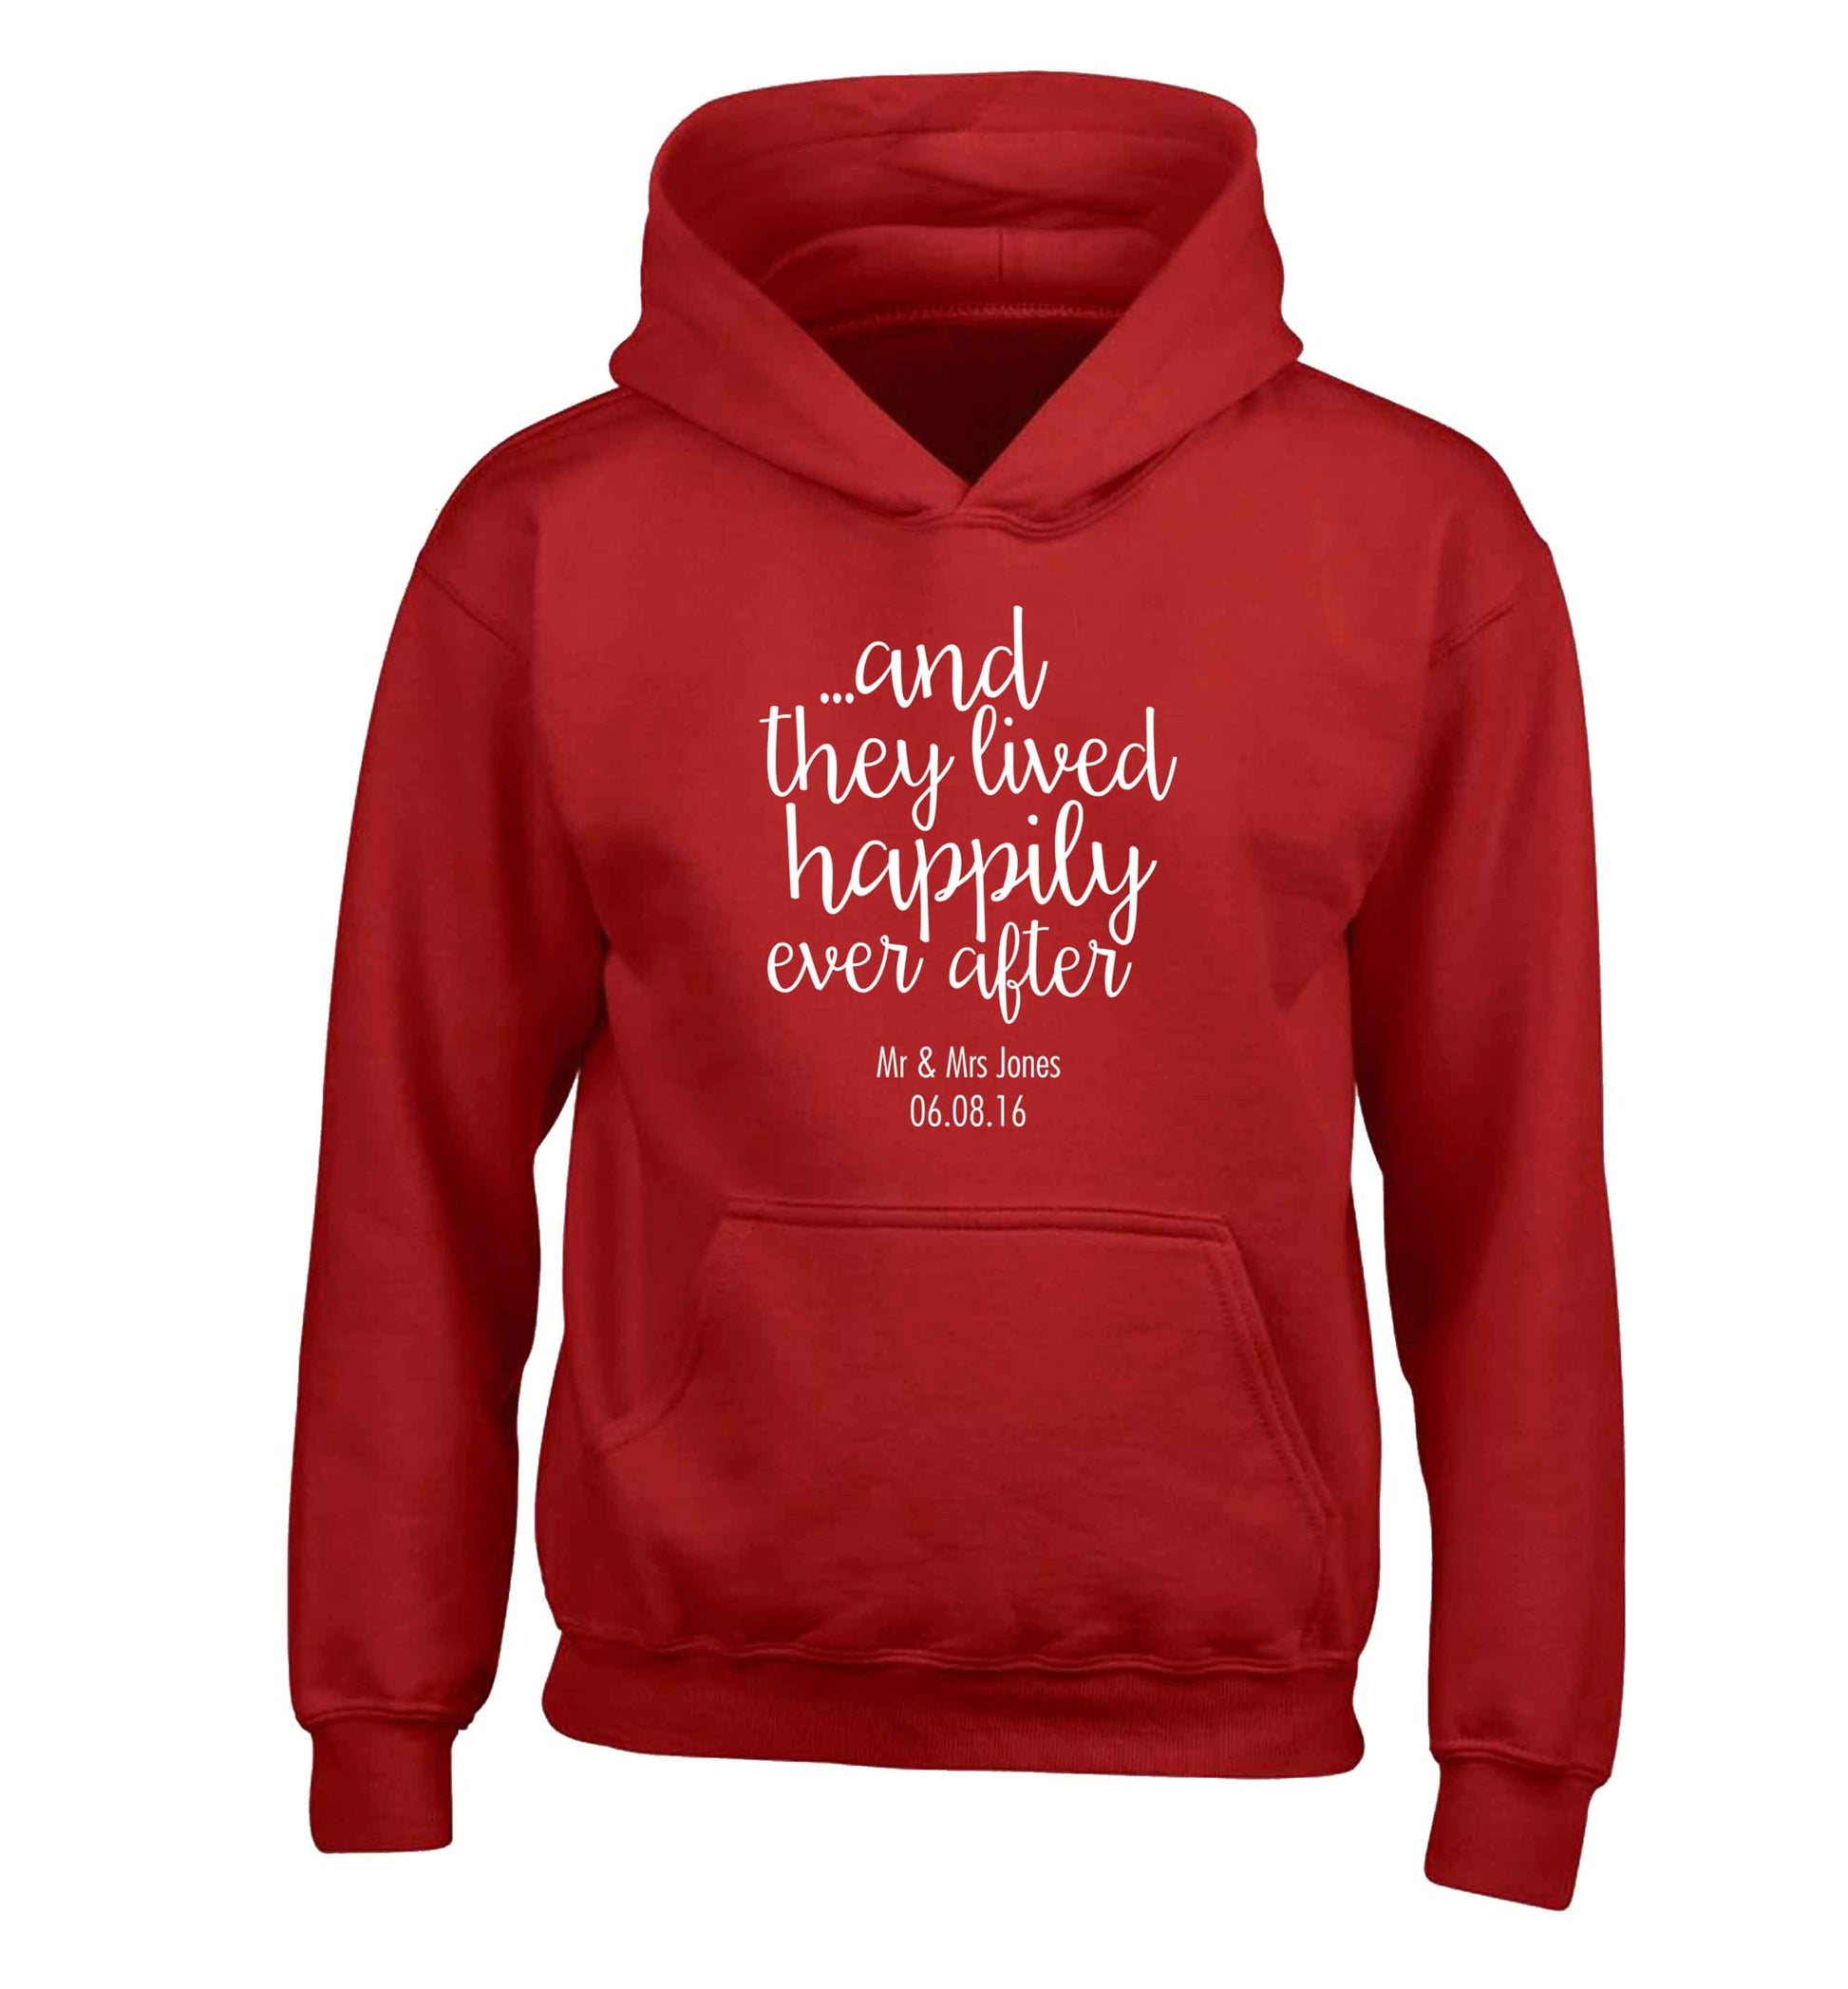 ...and they lived happily ever after - personalised date and names children's red hoodie 12-13 Years